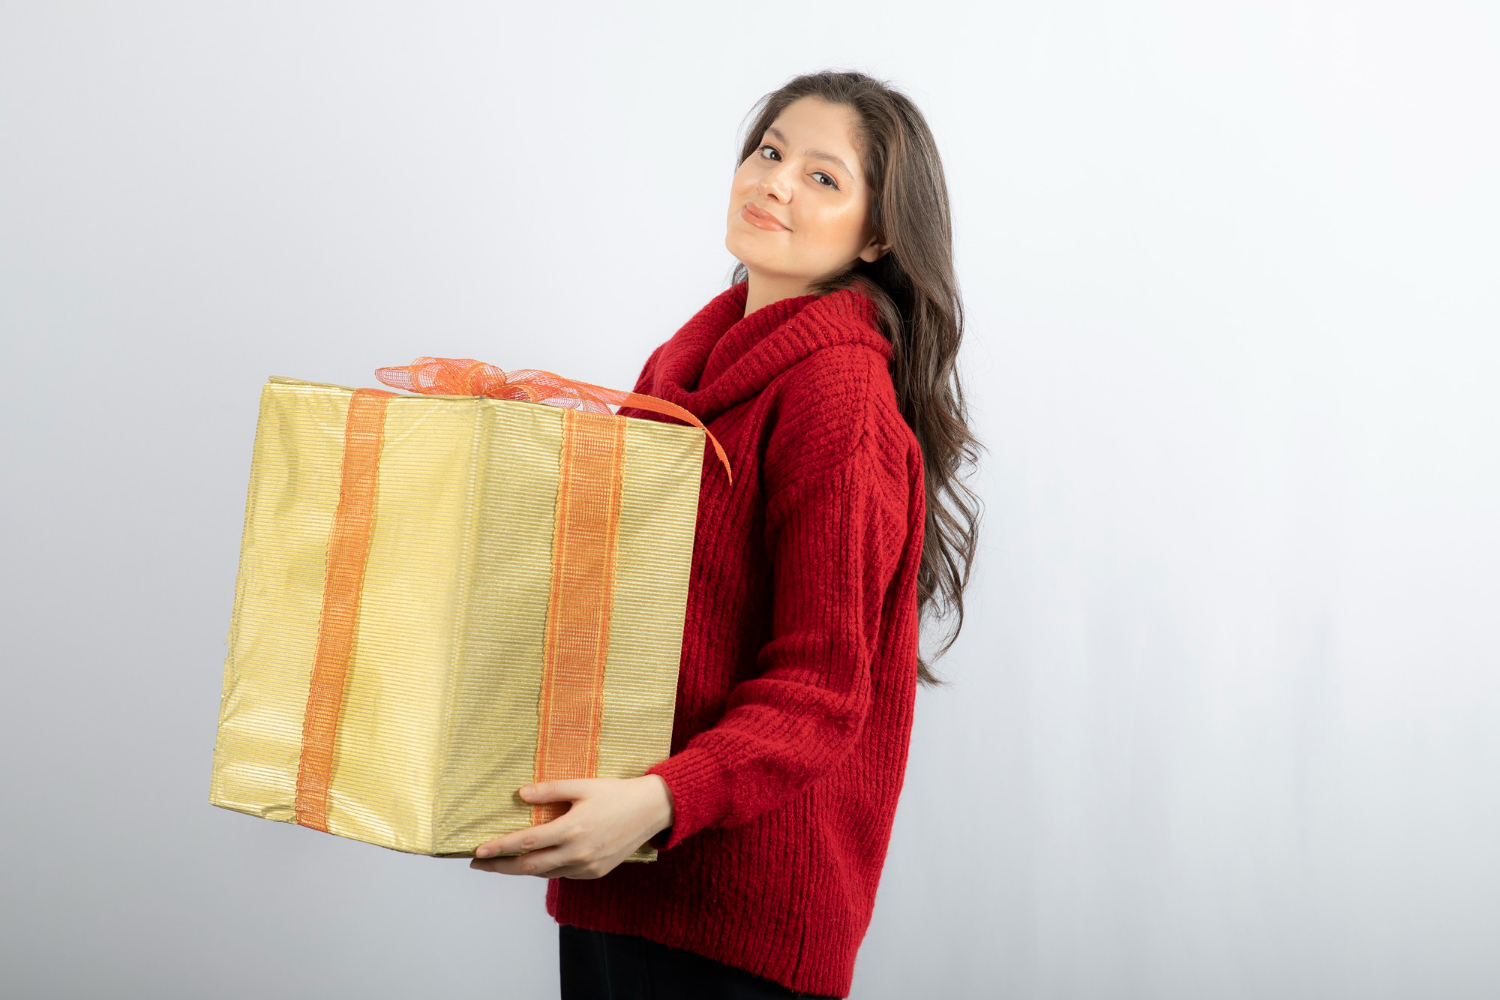 Woman with the wrapped box | Source: Freepik